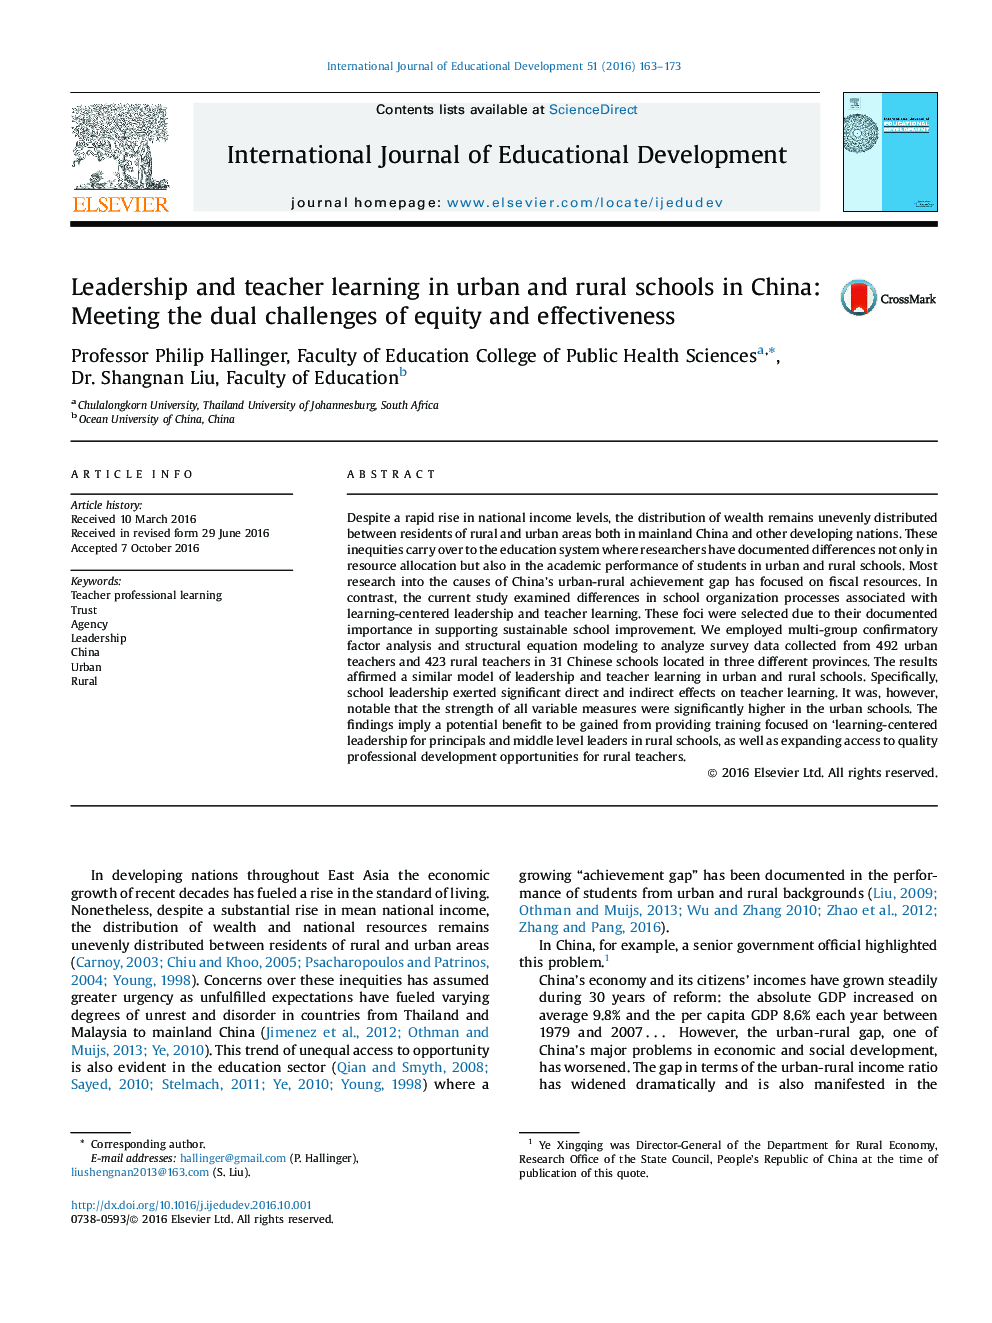 Leadership and teacher learning in urban and rural schools in China: Meeting the dual challenges of equity and effectiveness